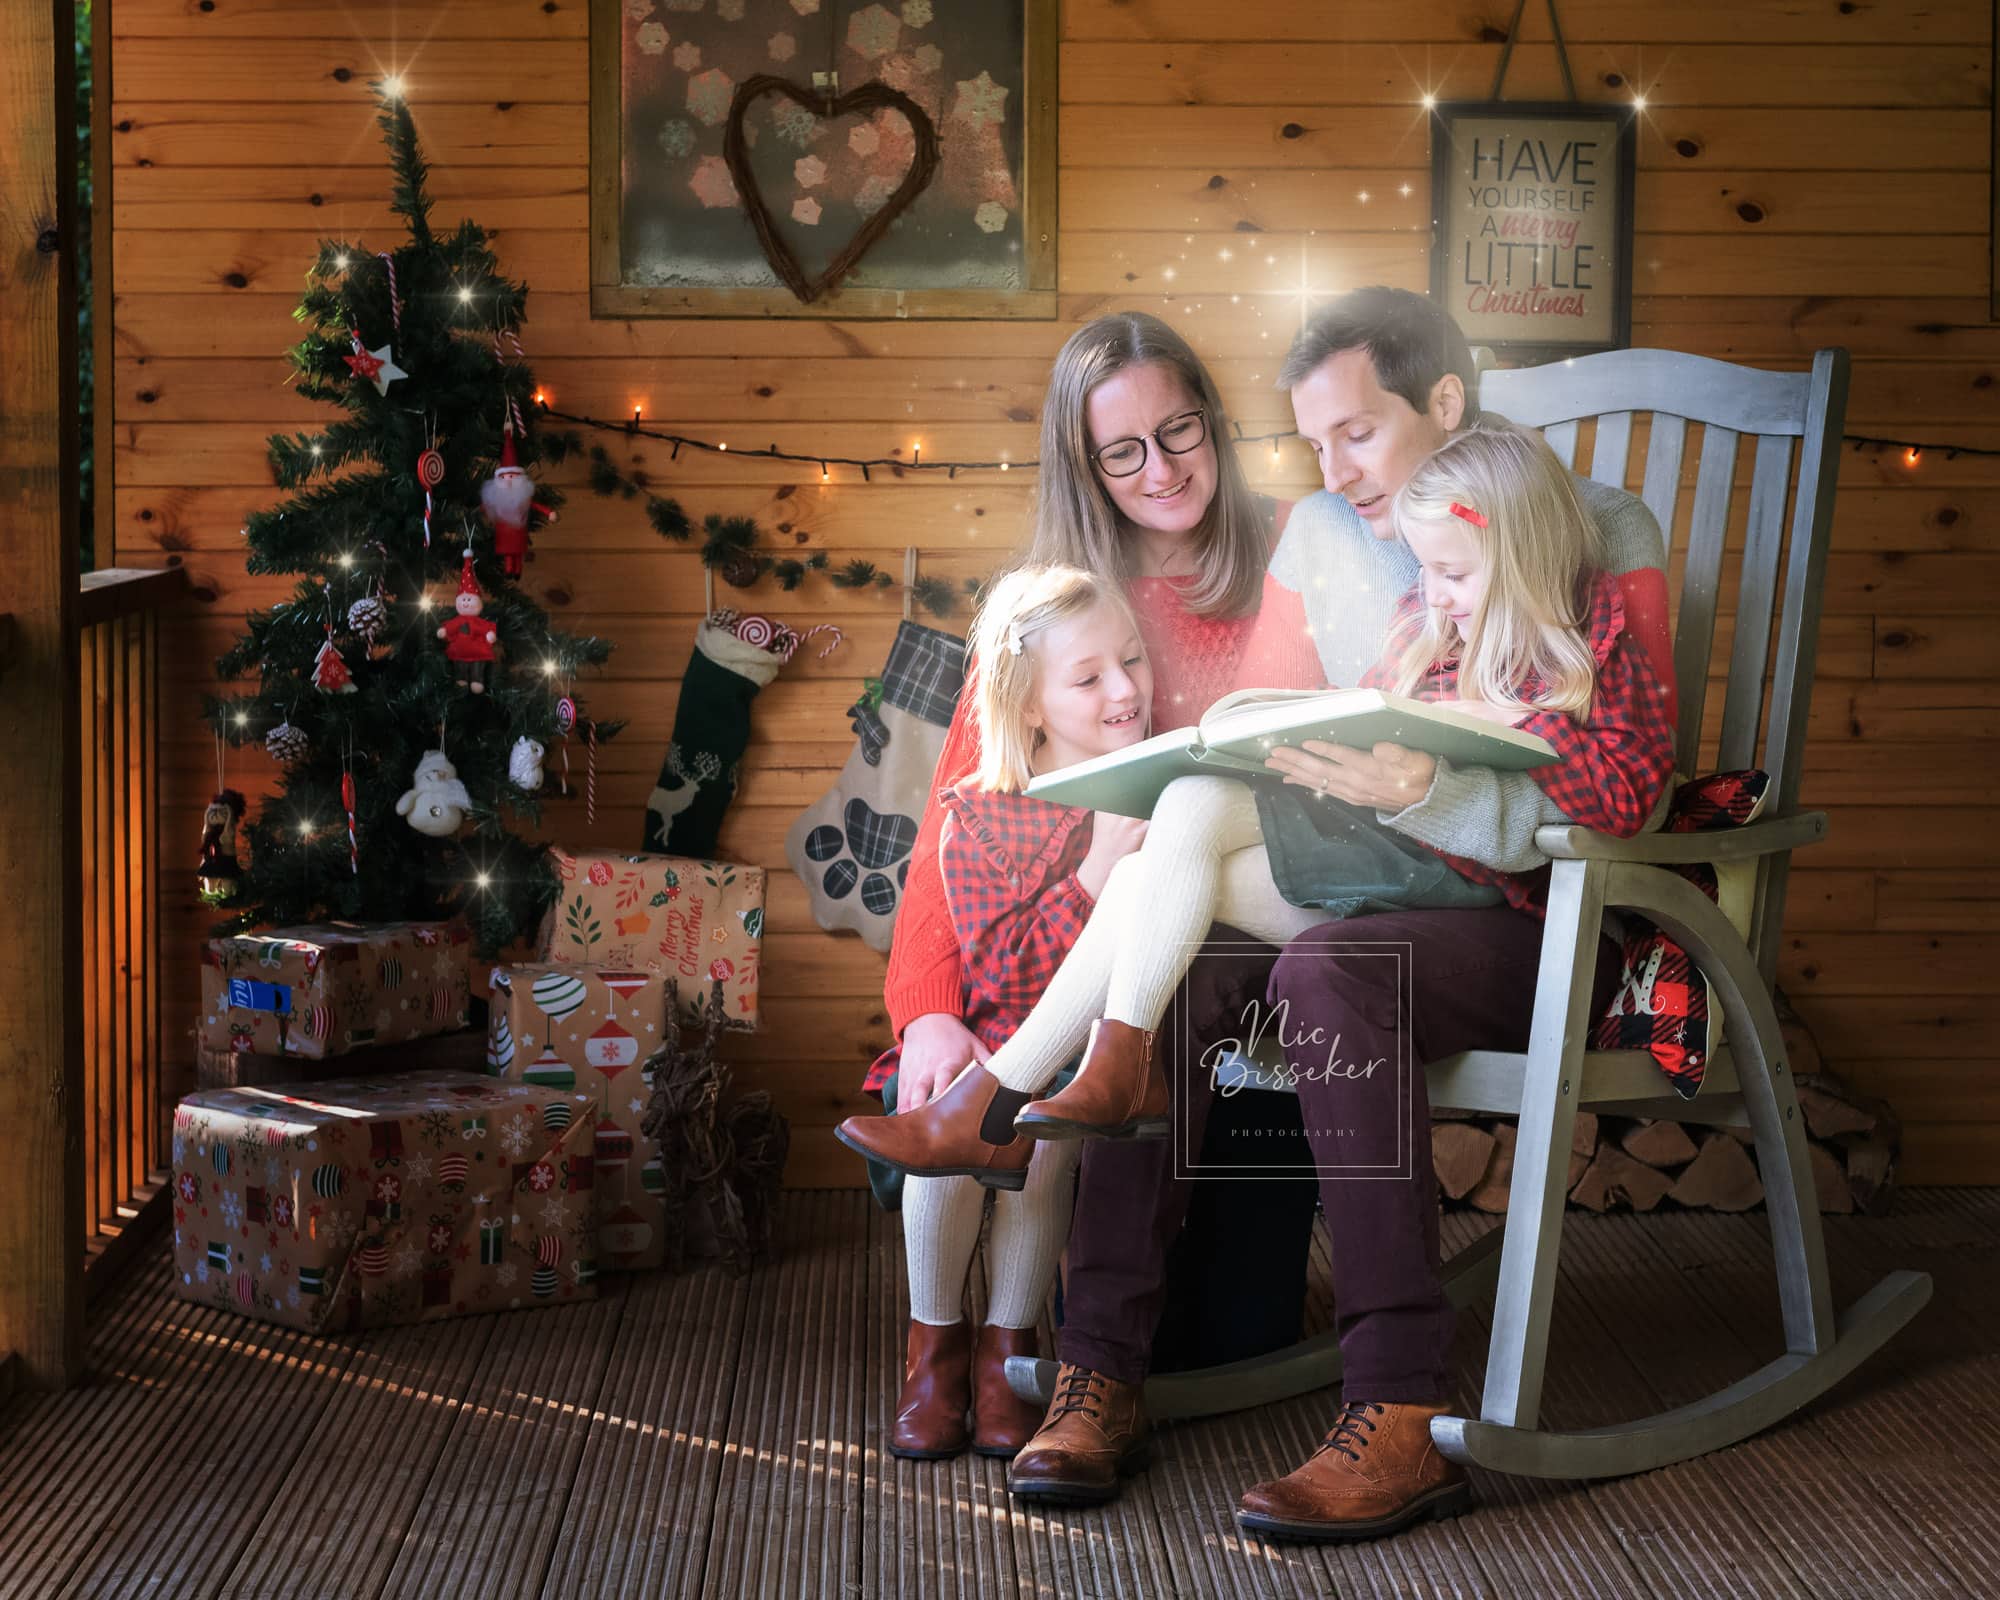 nic bisseker photography christmas mini sessions east grinstead